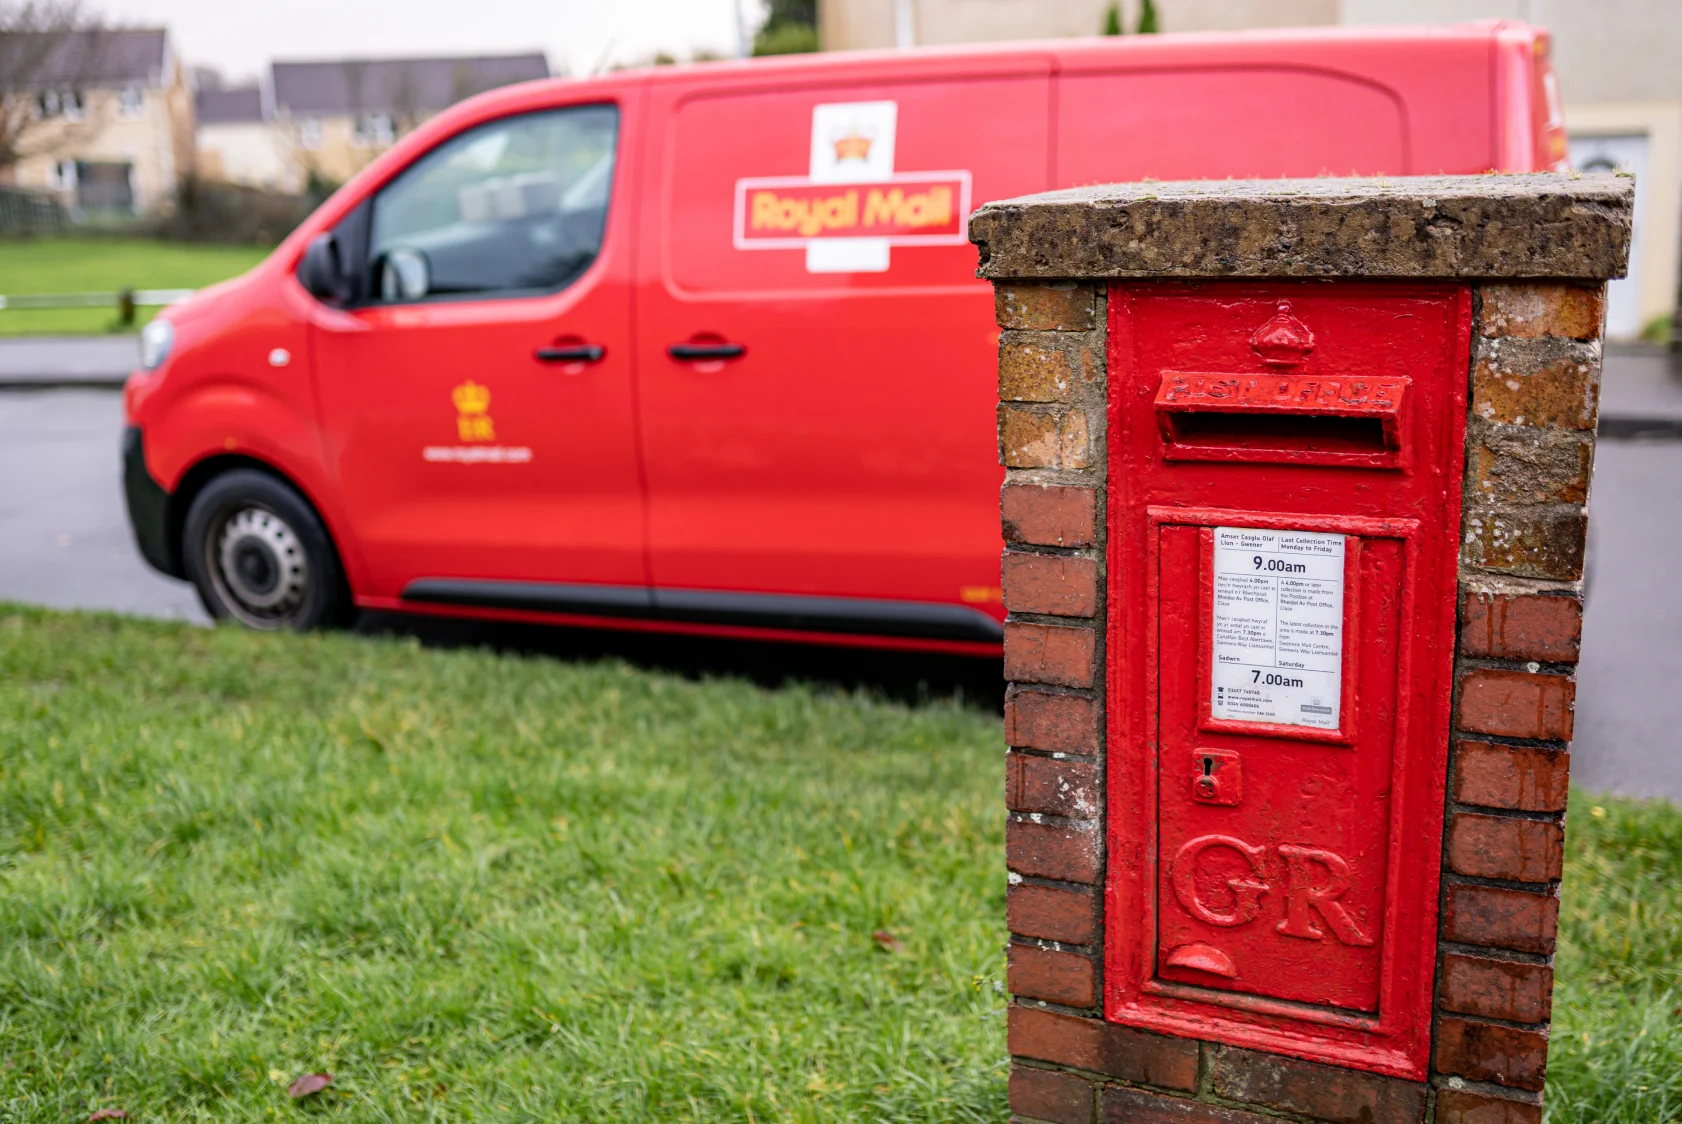 Royal mail courier post box and parked van